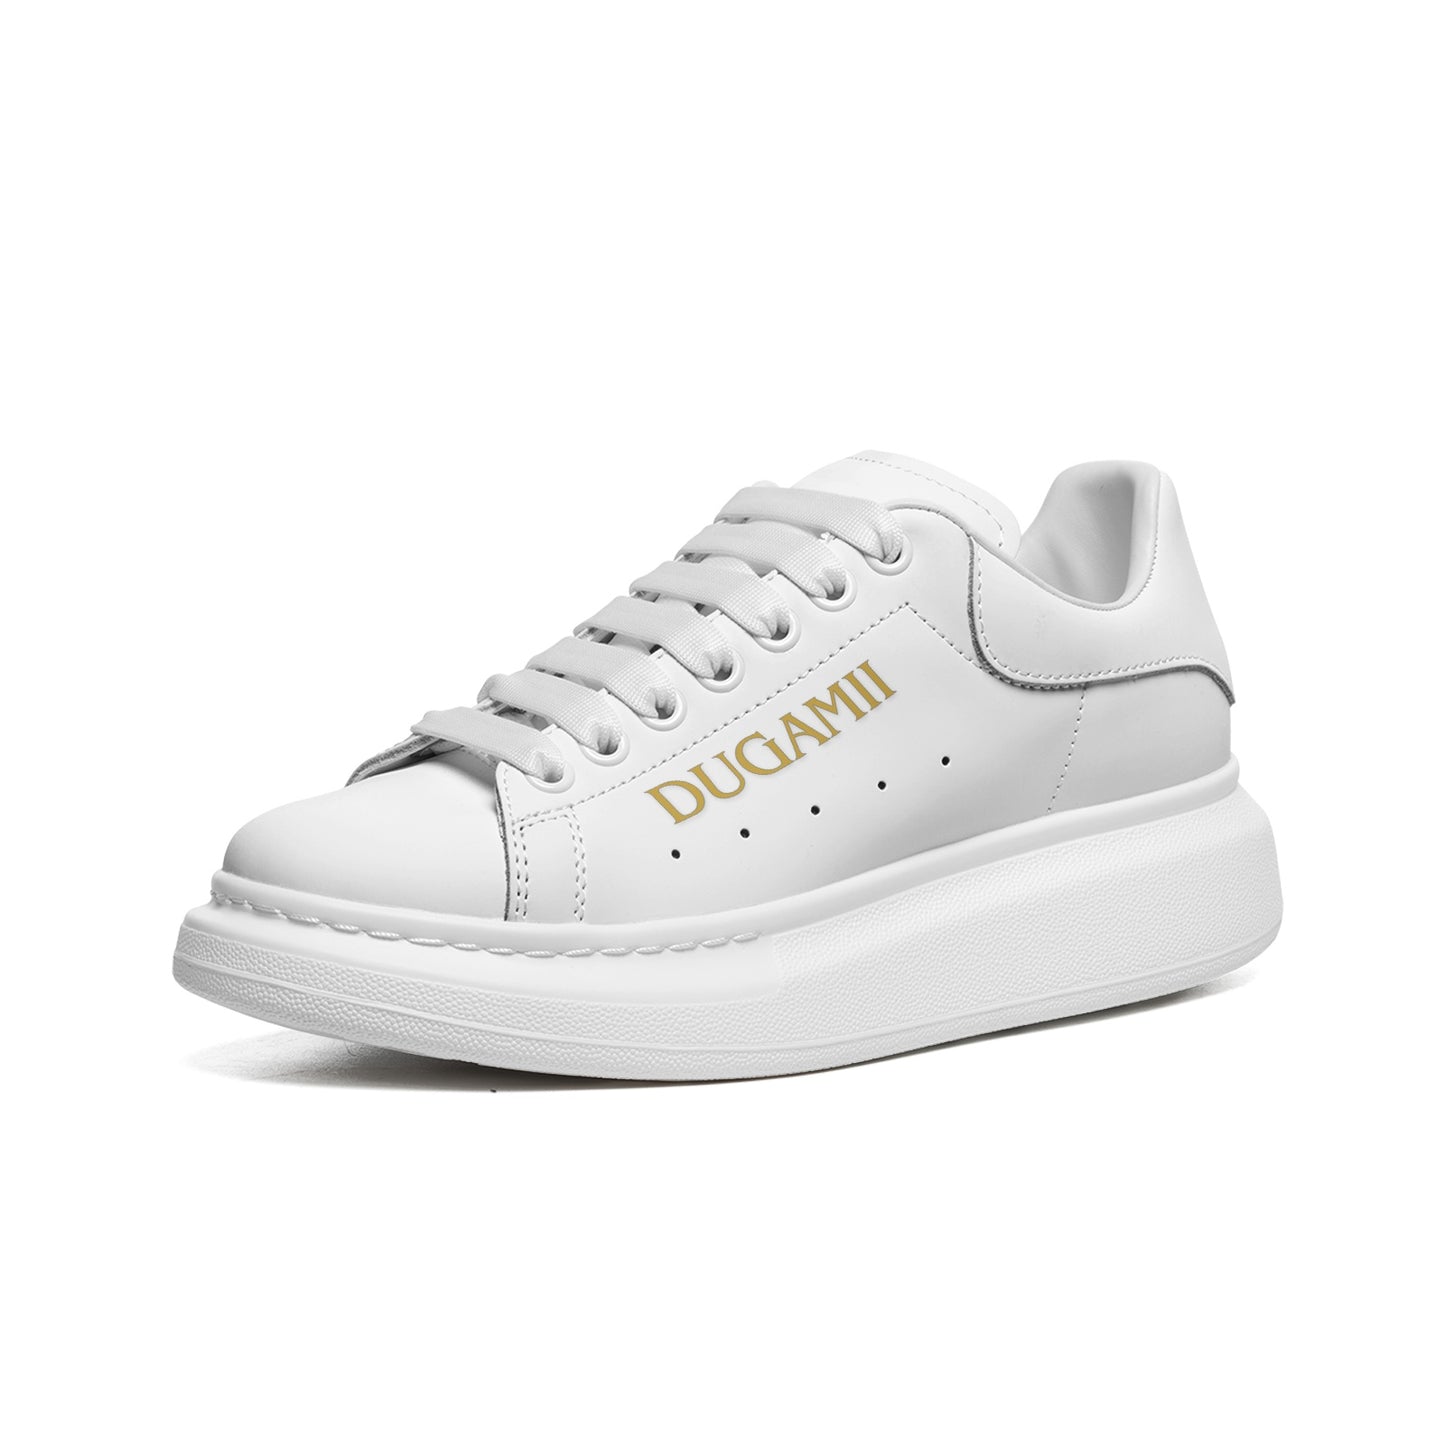 DuGamii Unisex Non-Slip Lace Up Leather Sneakers